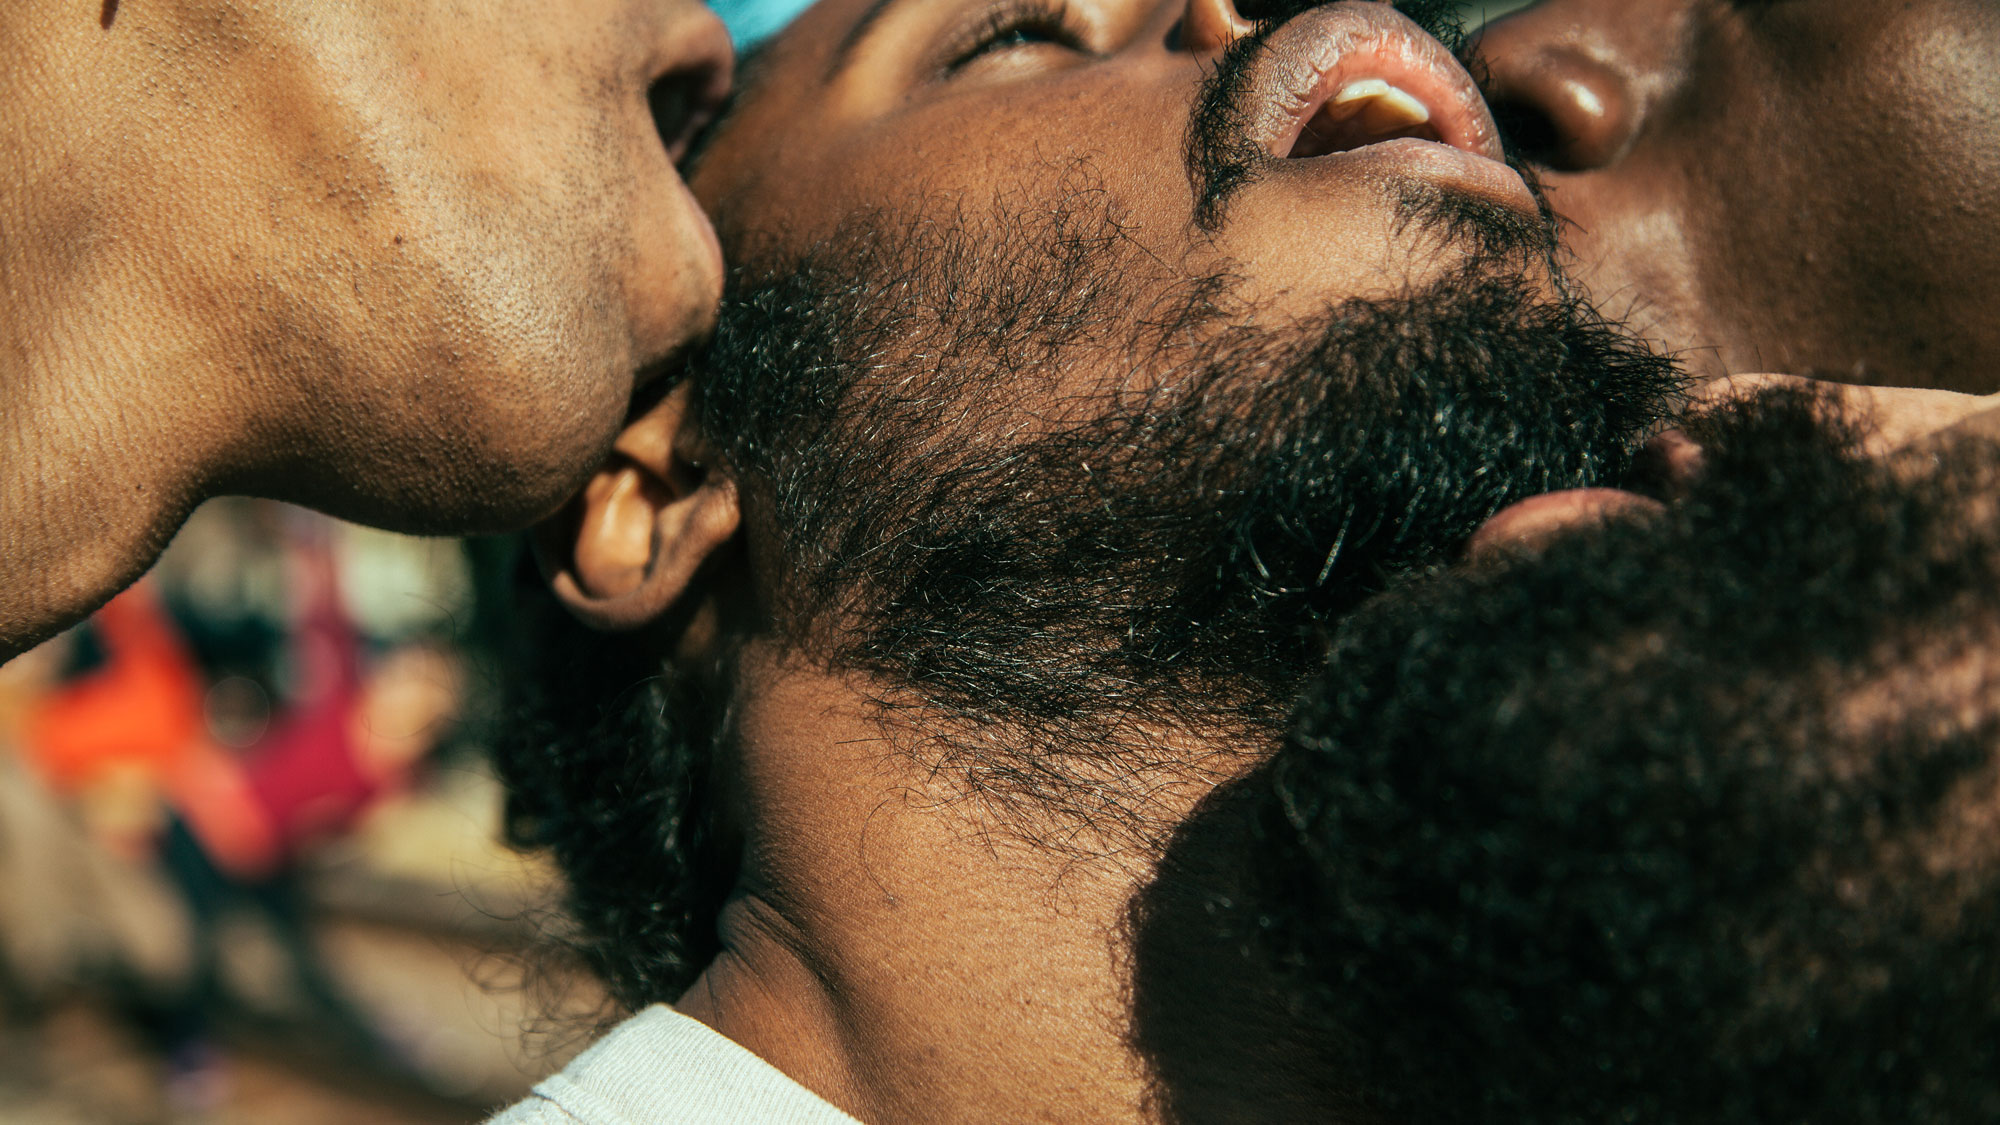 Four Black men in close proximity with mouths open creating a sexual scene. 